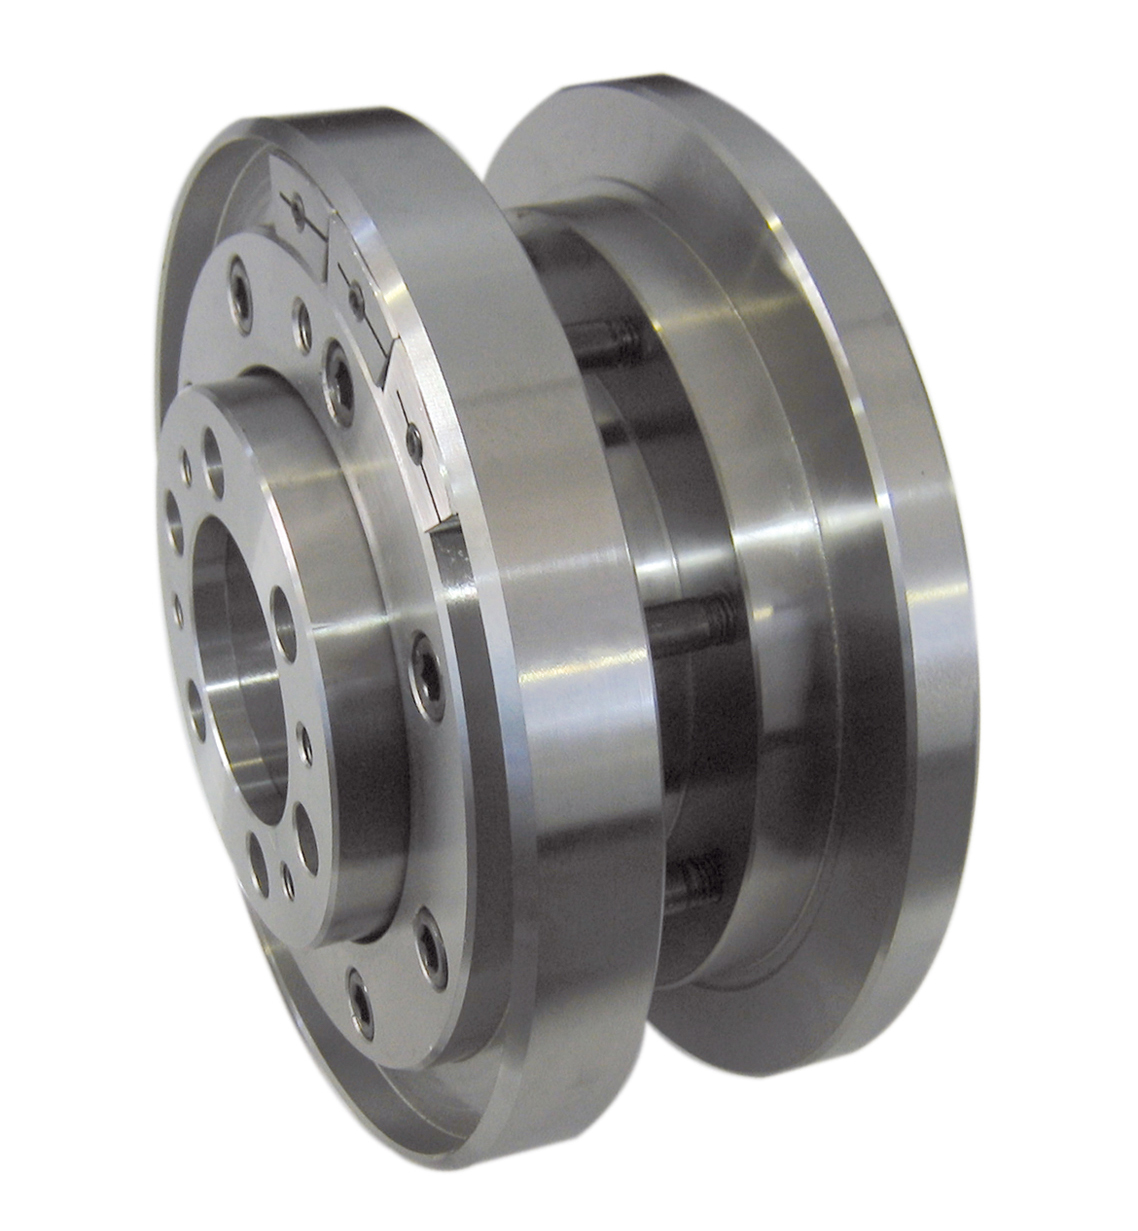 Construction of grinding-wheel support flanges for grinding